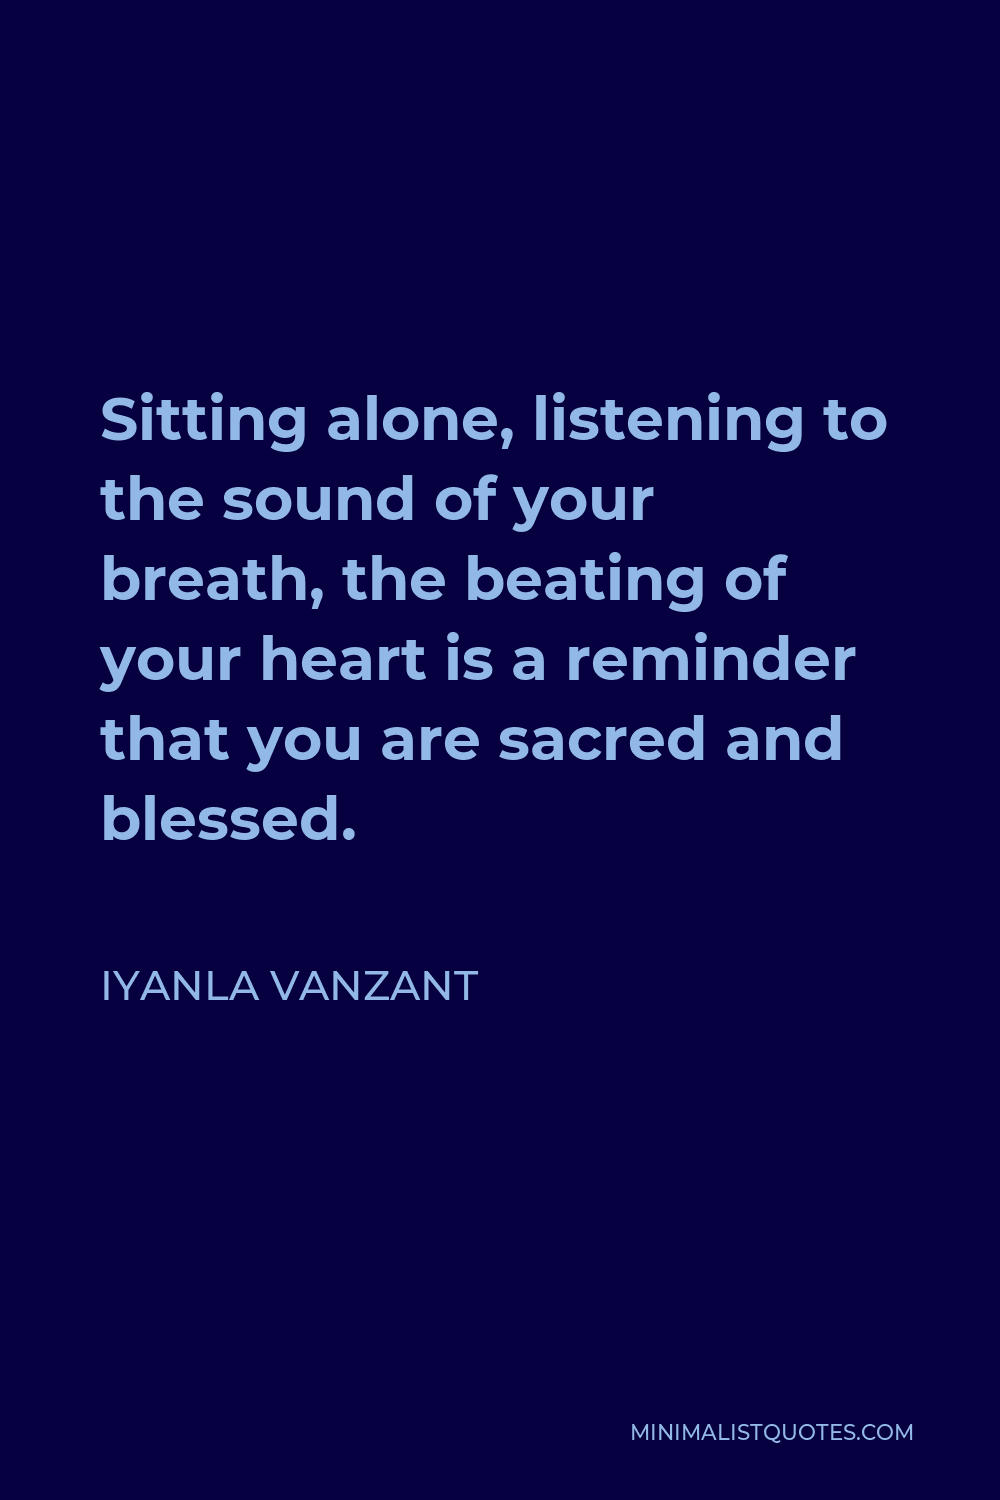 Iyanla Vanzant Quote - Sitting alone, listening to the sound of your breath, the beating of your heart is a reminder that you are sacred and blessed.